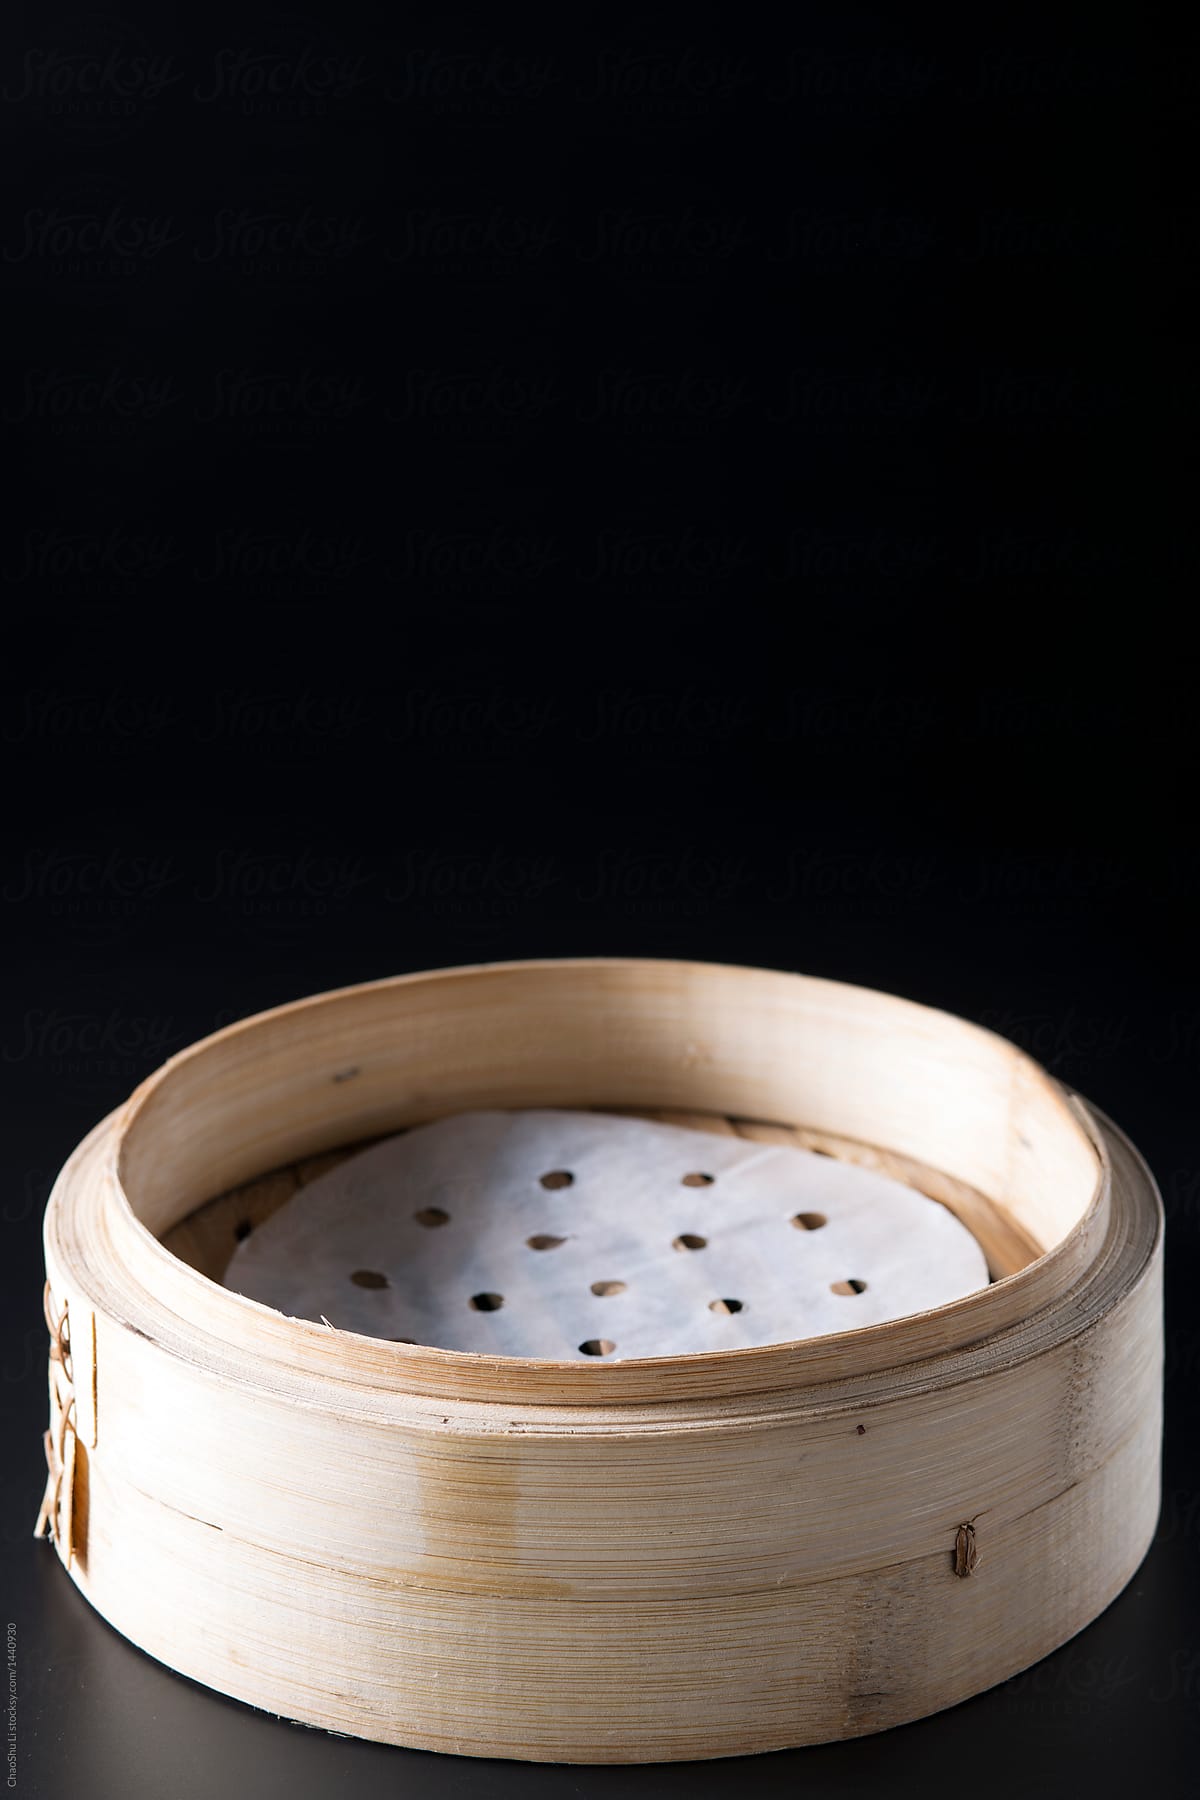 Chinese tableware, steamer, empty. On a black background